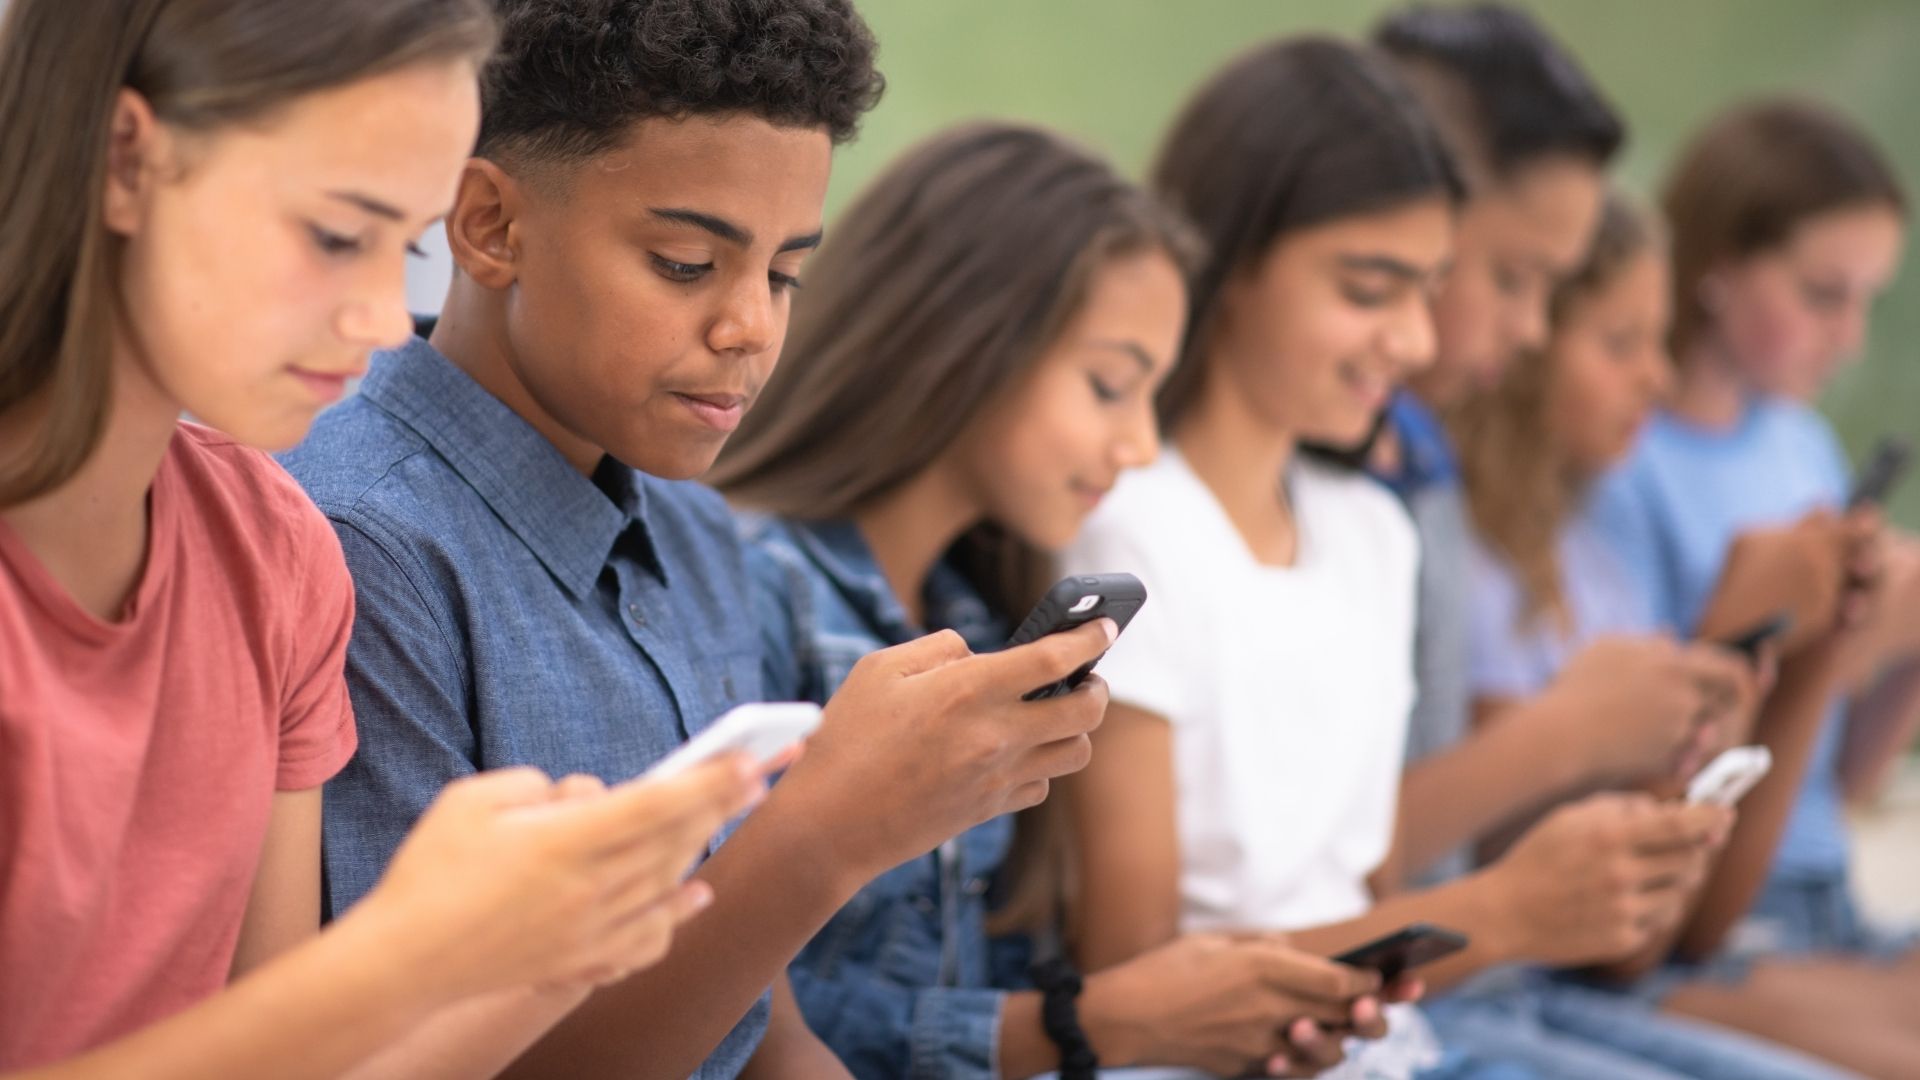 Concerning Medical And Behavior Issues Emerging From Social Media Use (Especially In Teens and Girls)